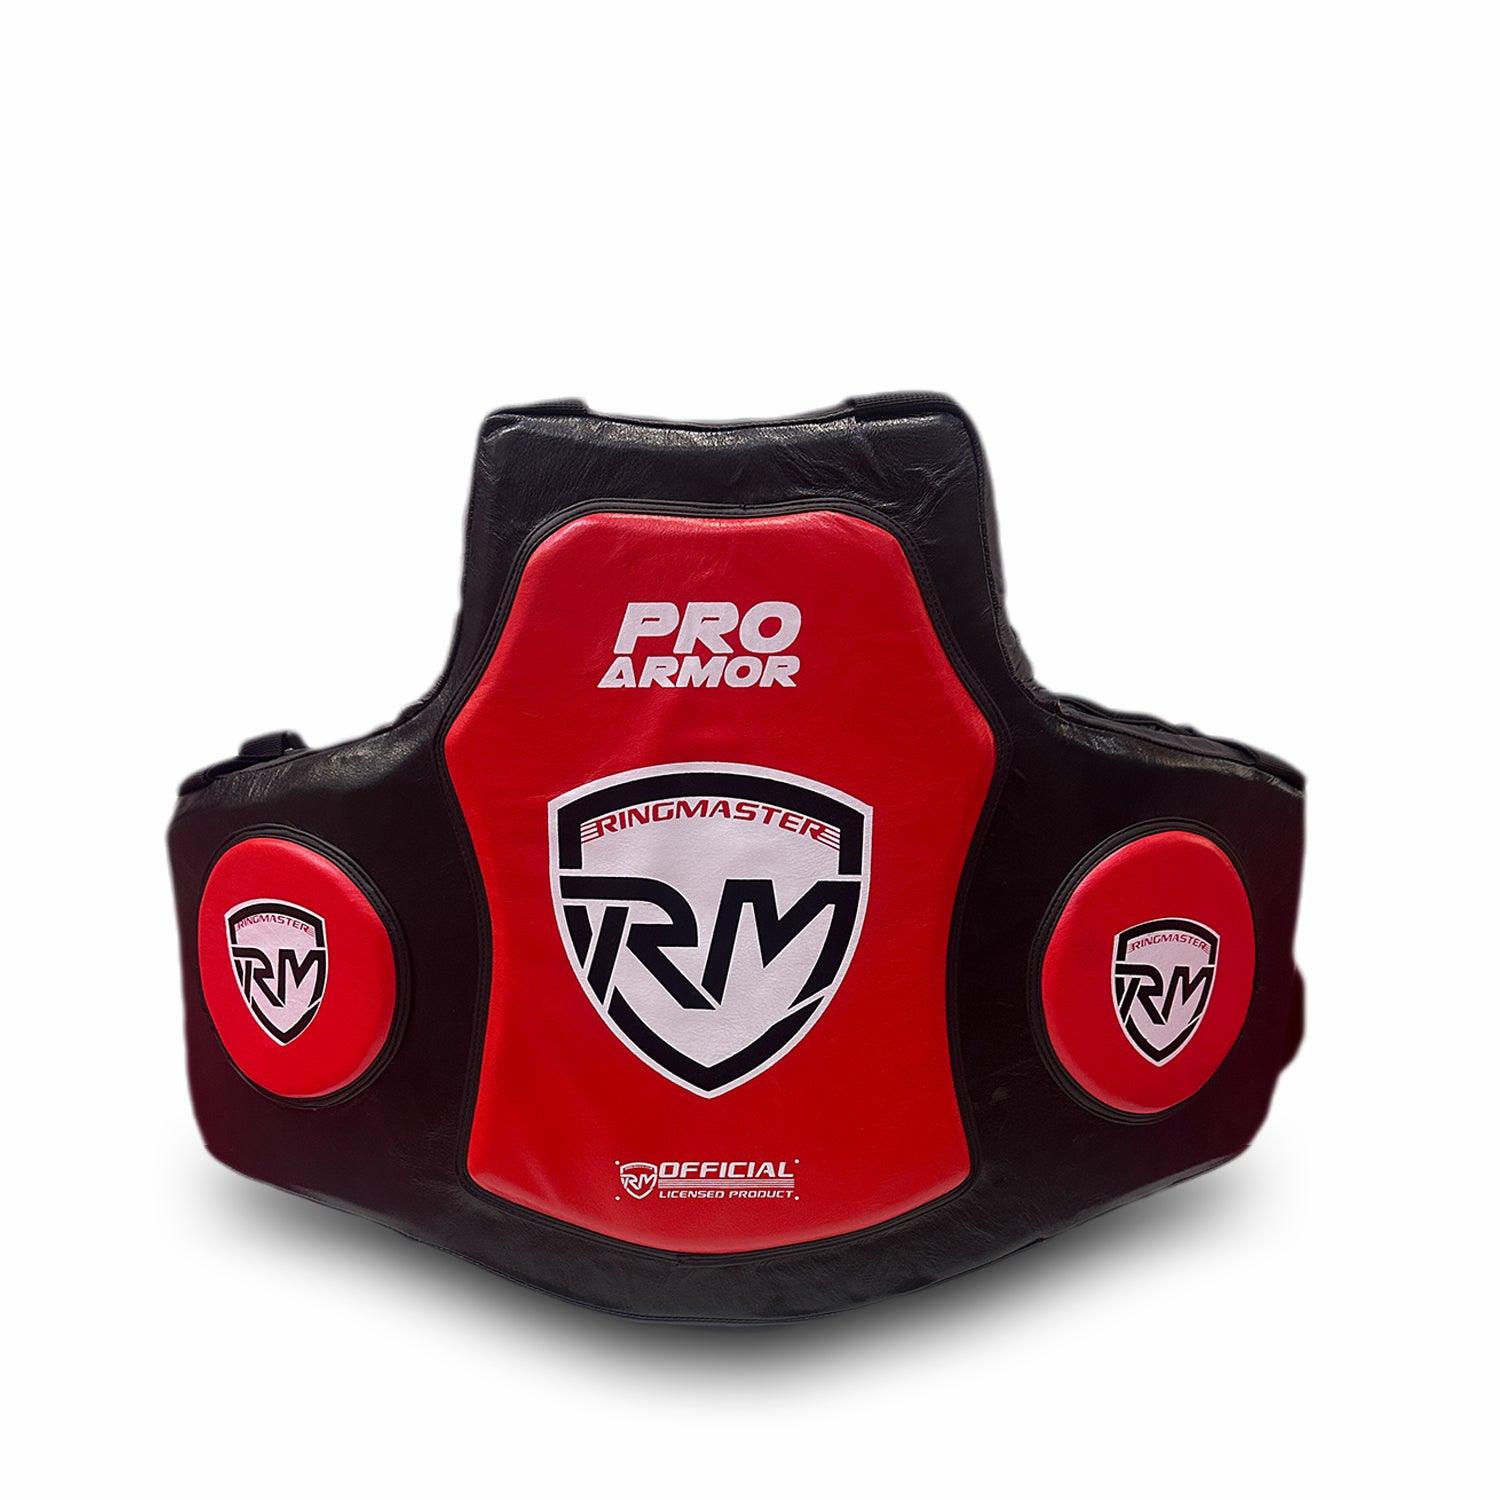 RingMaster Sports Pro Armor Series Body Protectors Genuine Leather One Size Black and Red - RINGMASTER SPORTS - Made For Champions